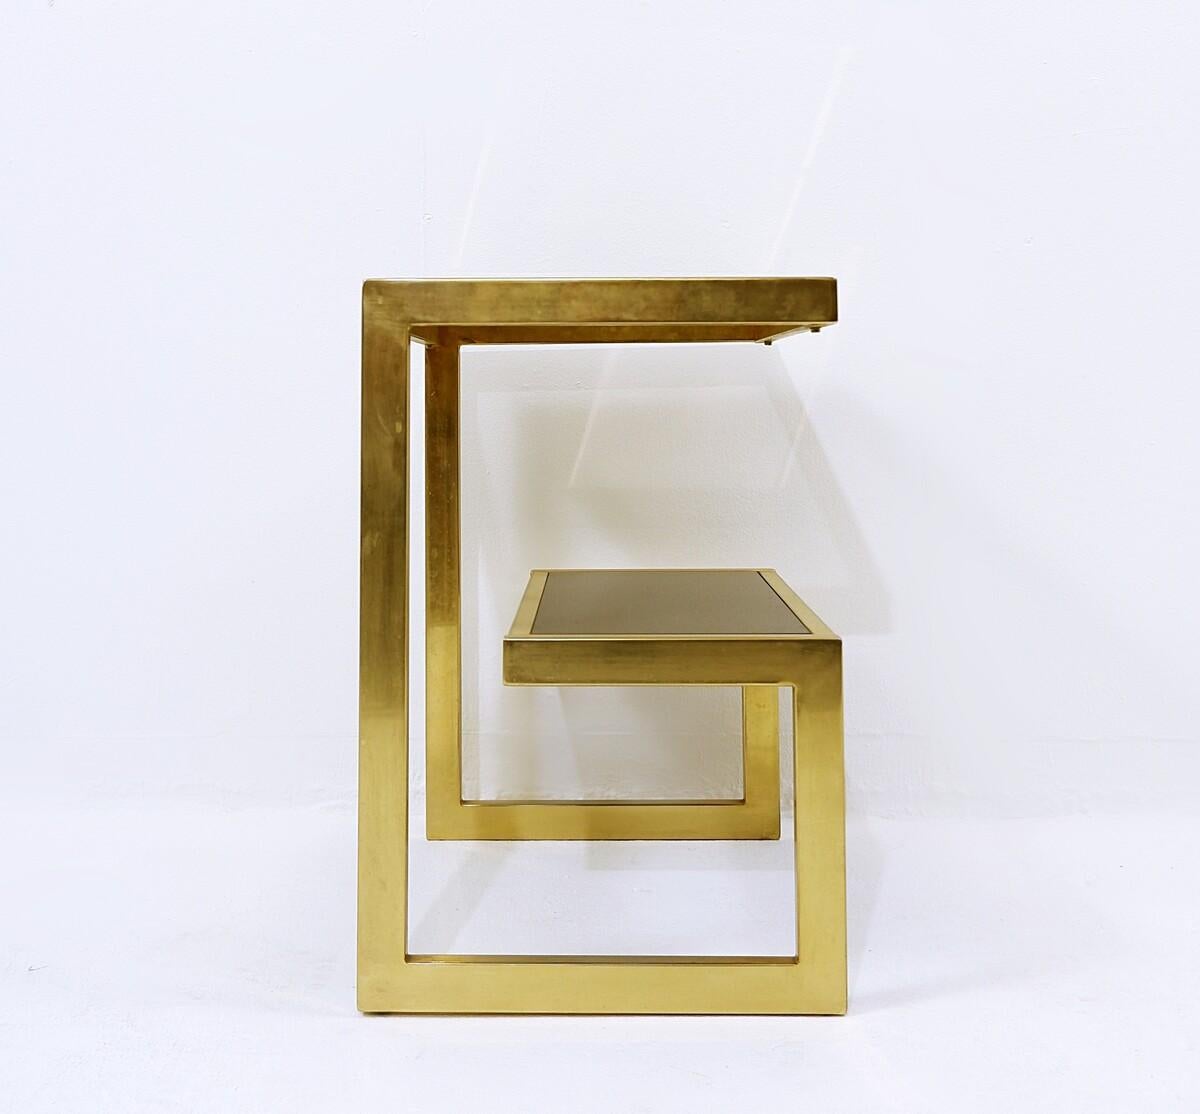 Italian Mid-Century Modern Gold Plated Side Table from Belgo Chrome, 1970s